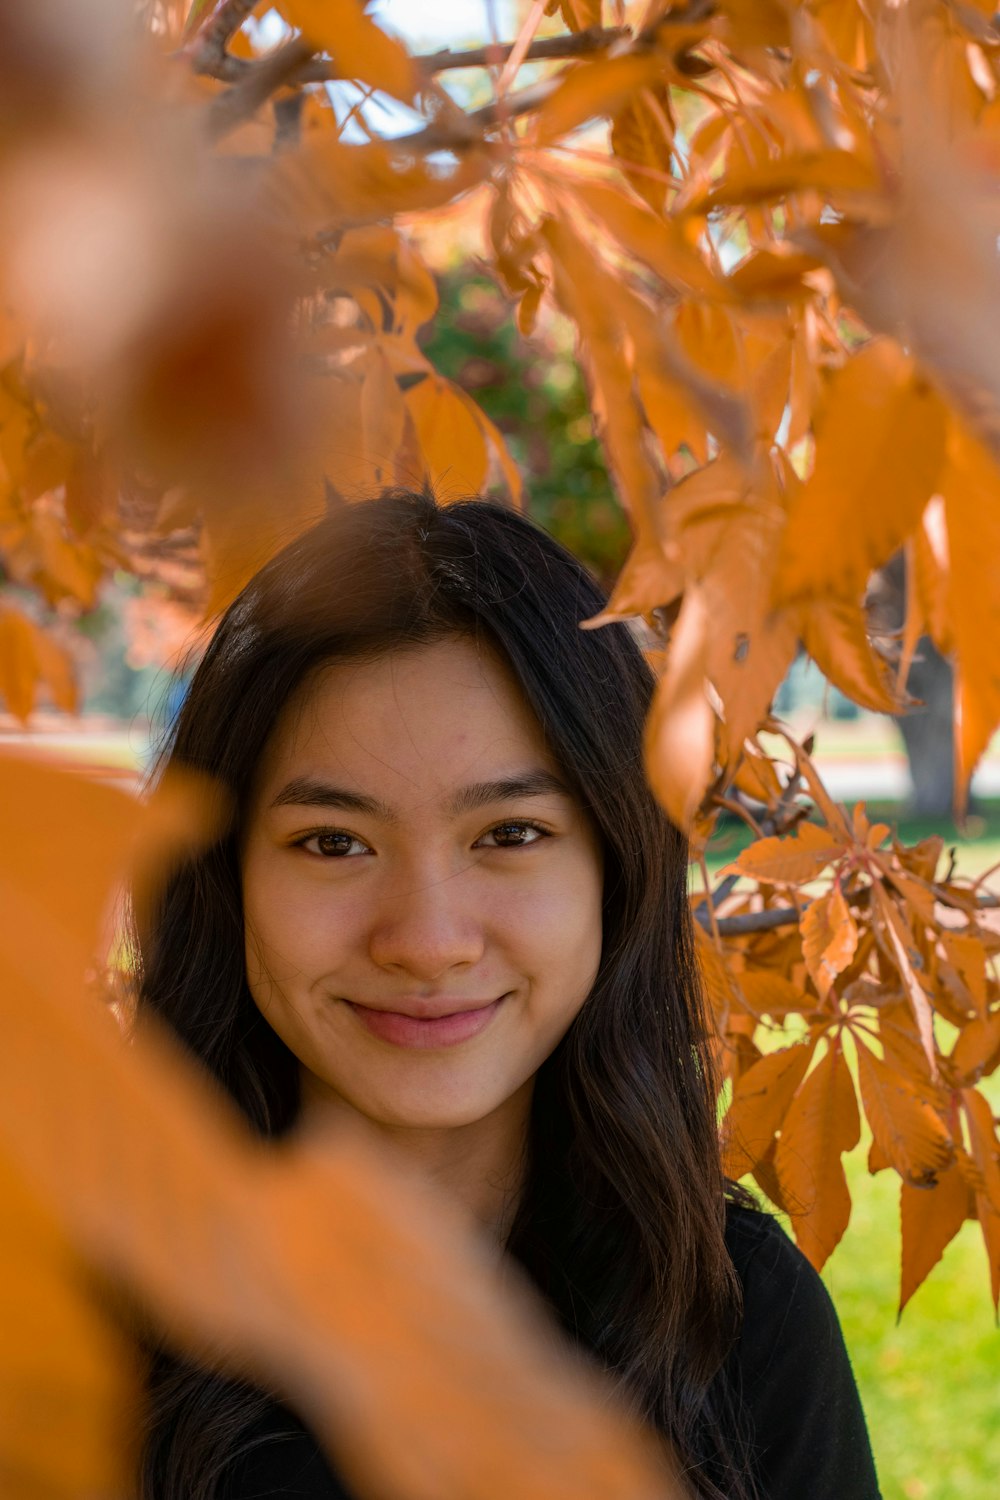 woman smiling near brown leaves during daytime